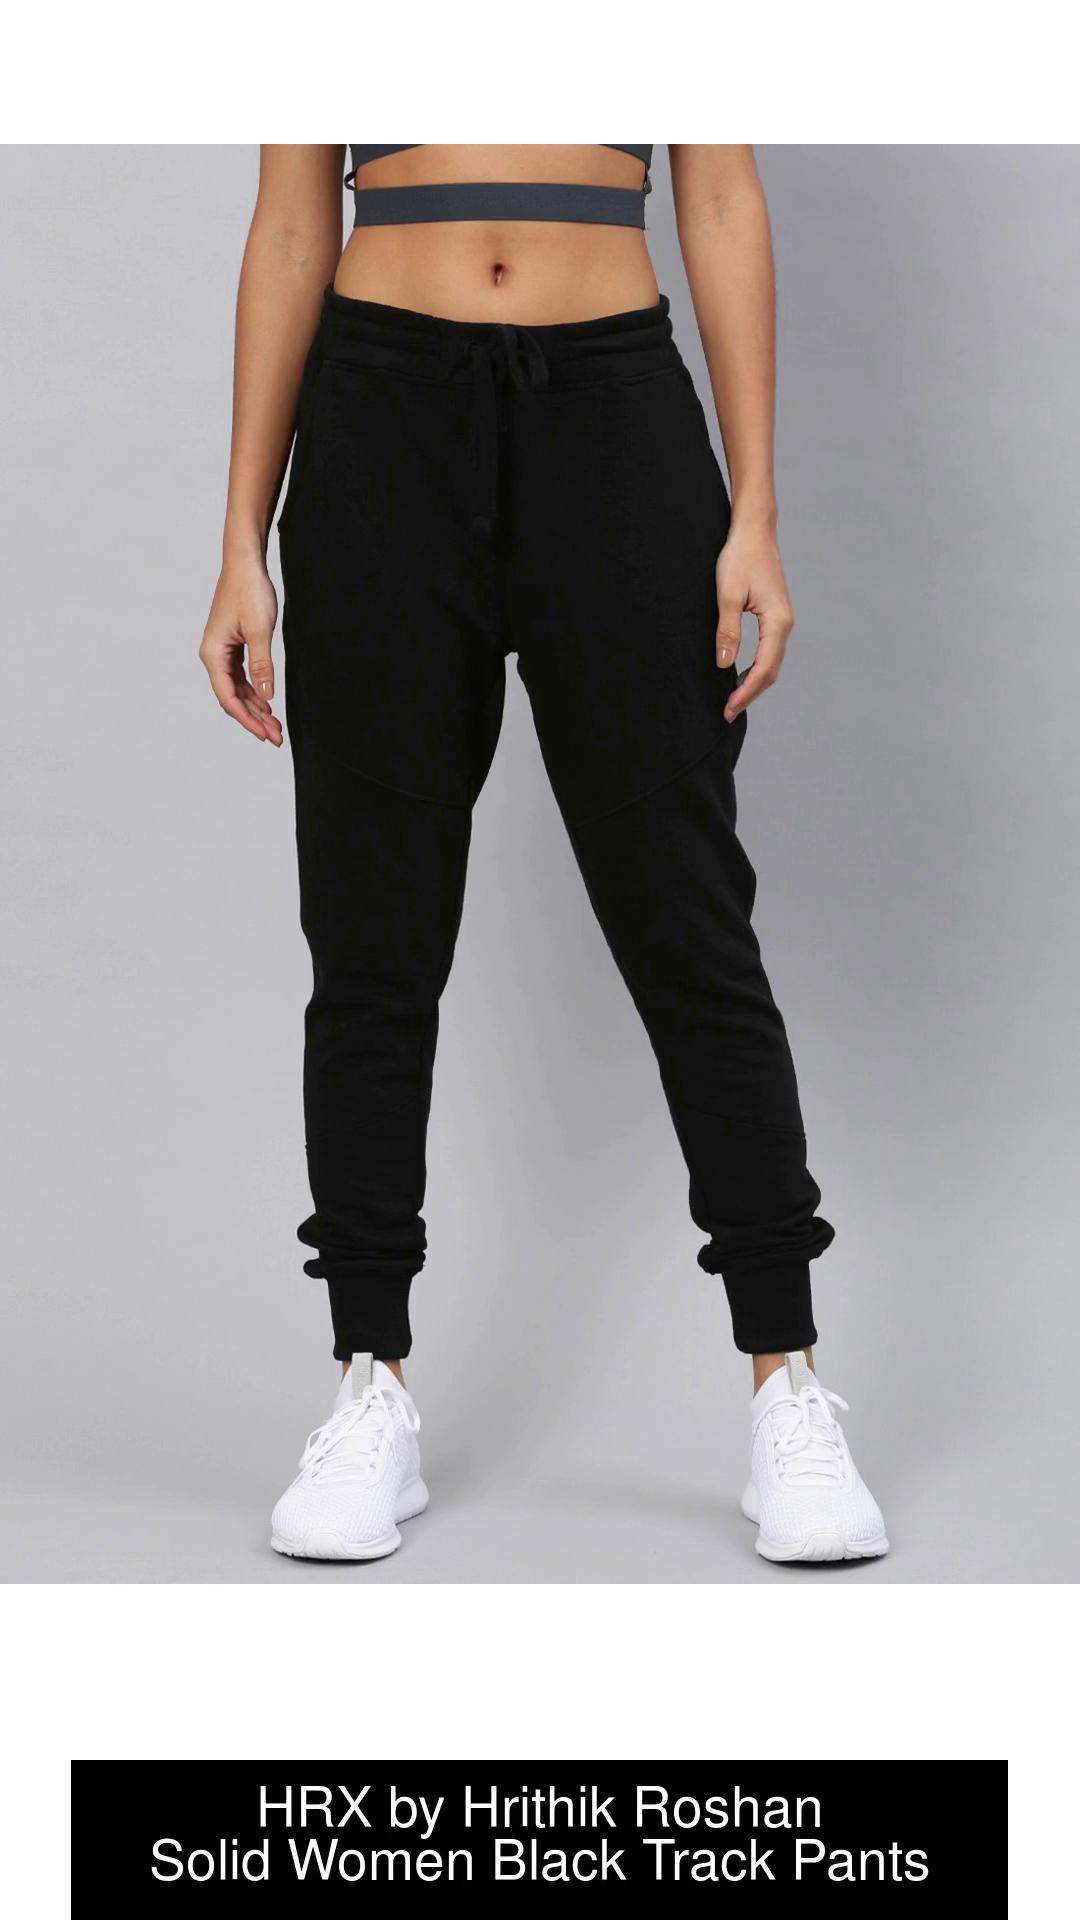 HRX Slim Trousers outlet - 1800 products on sale | FASHIOLA.co.uk